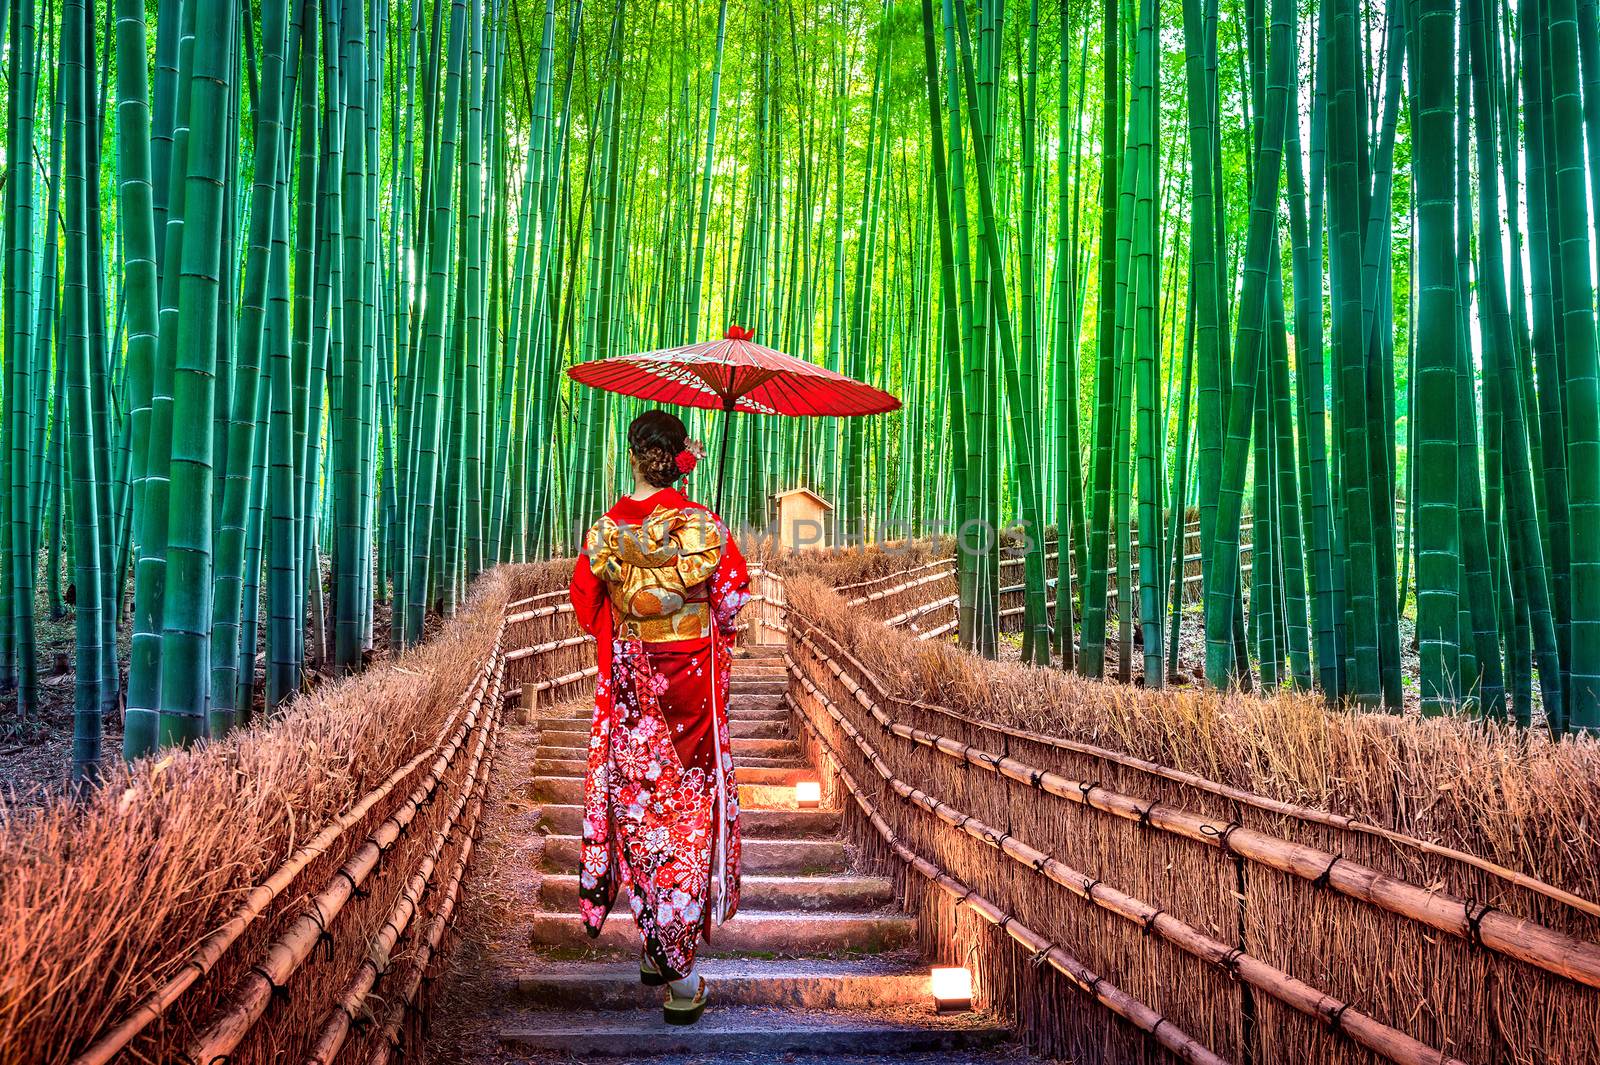 Bamboo Forest. Asian woman wearing japanese traditional kimono a by gutarphotoghaphy